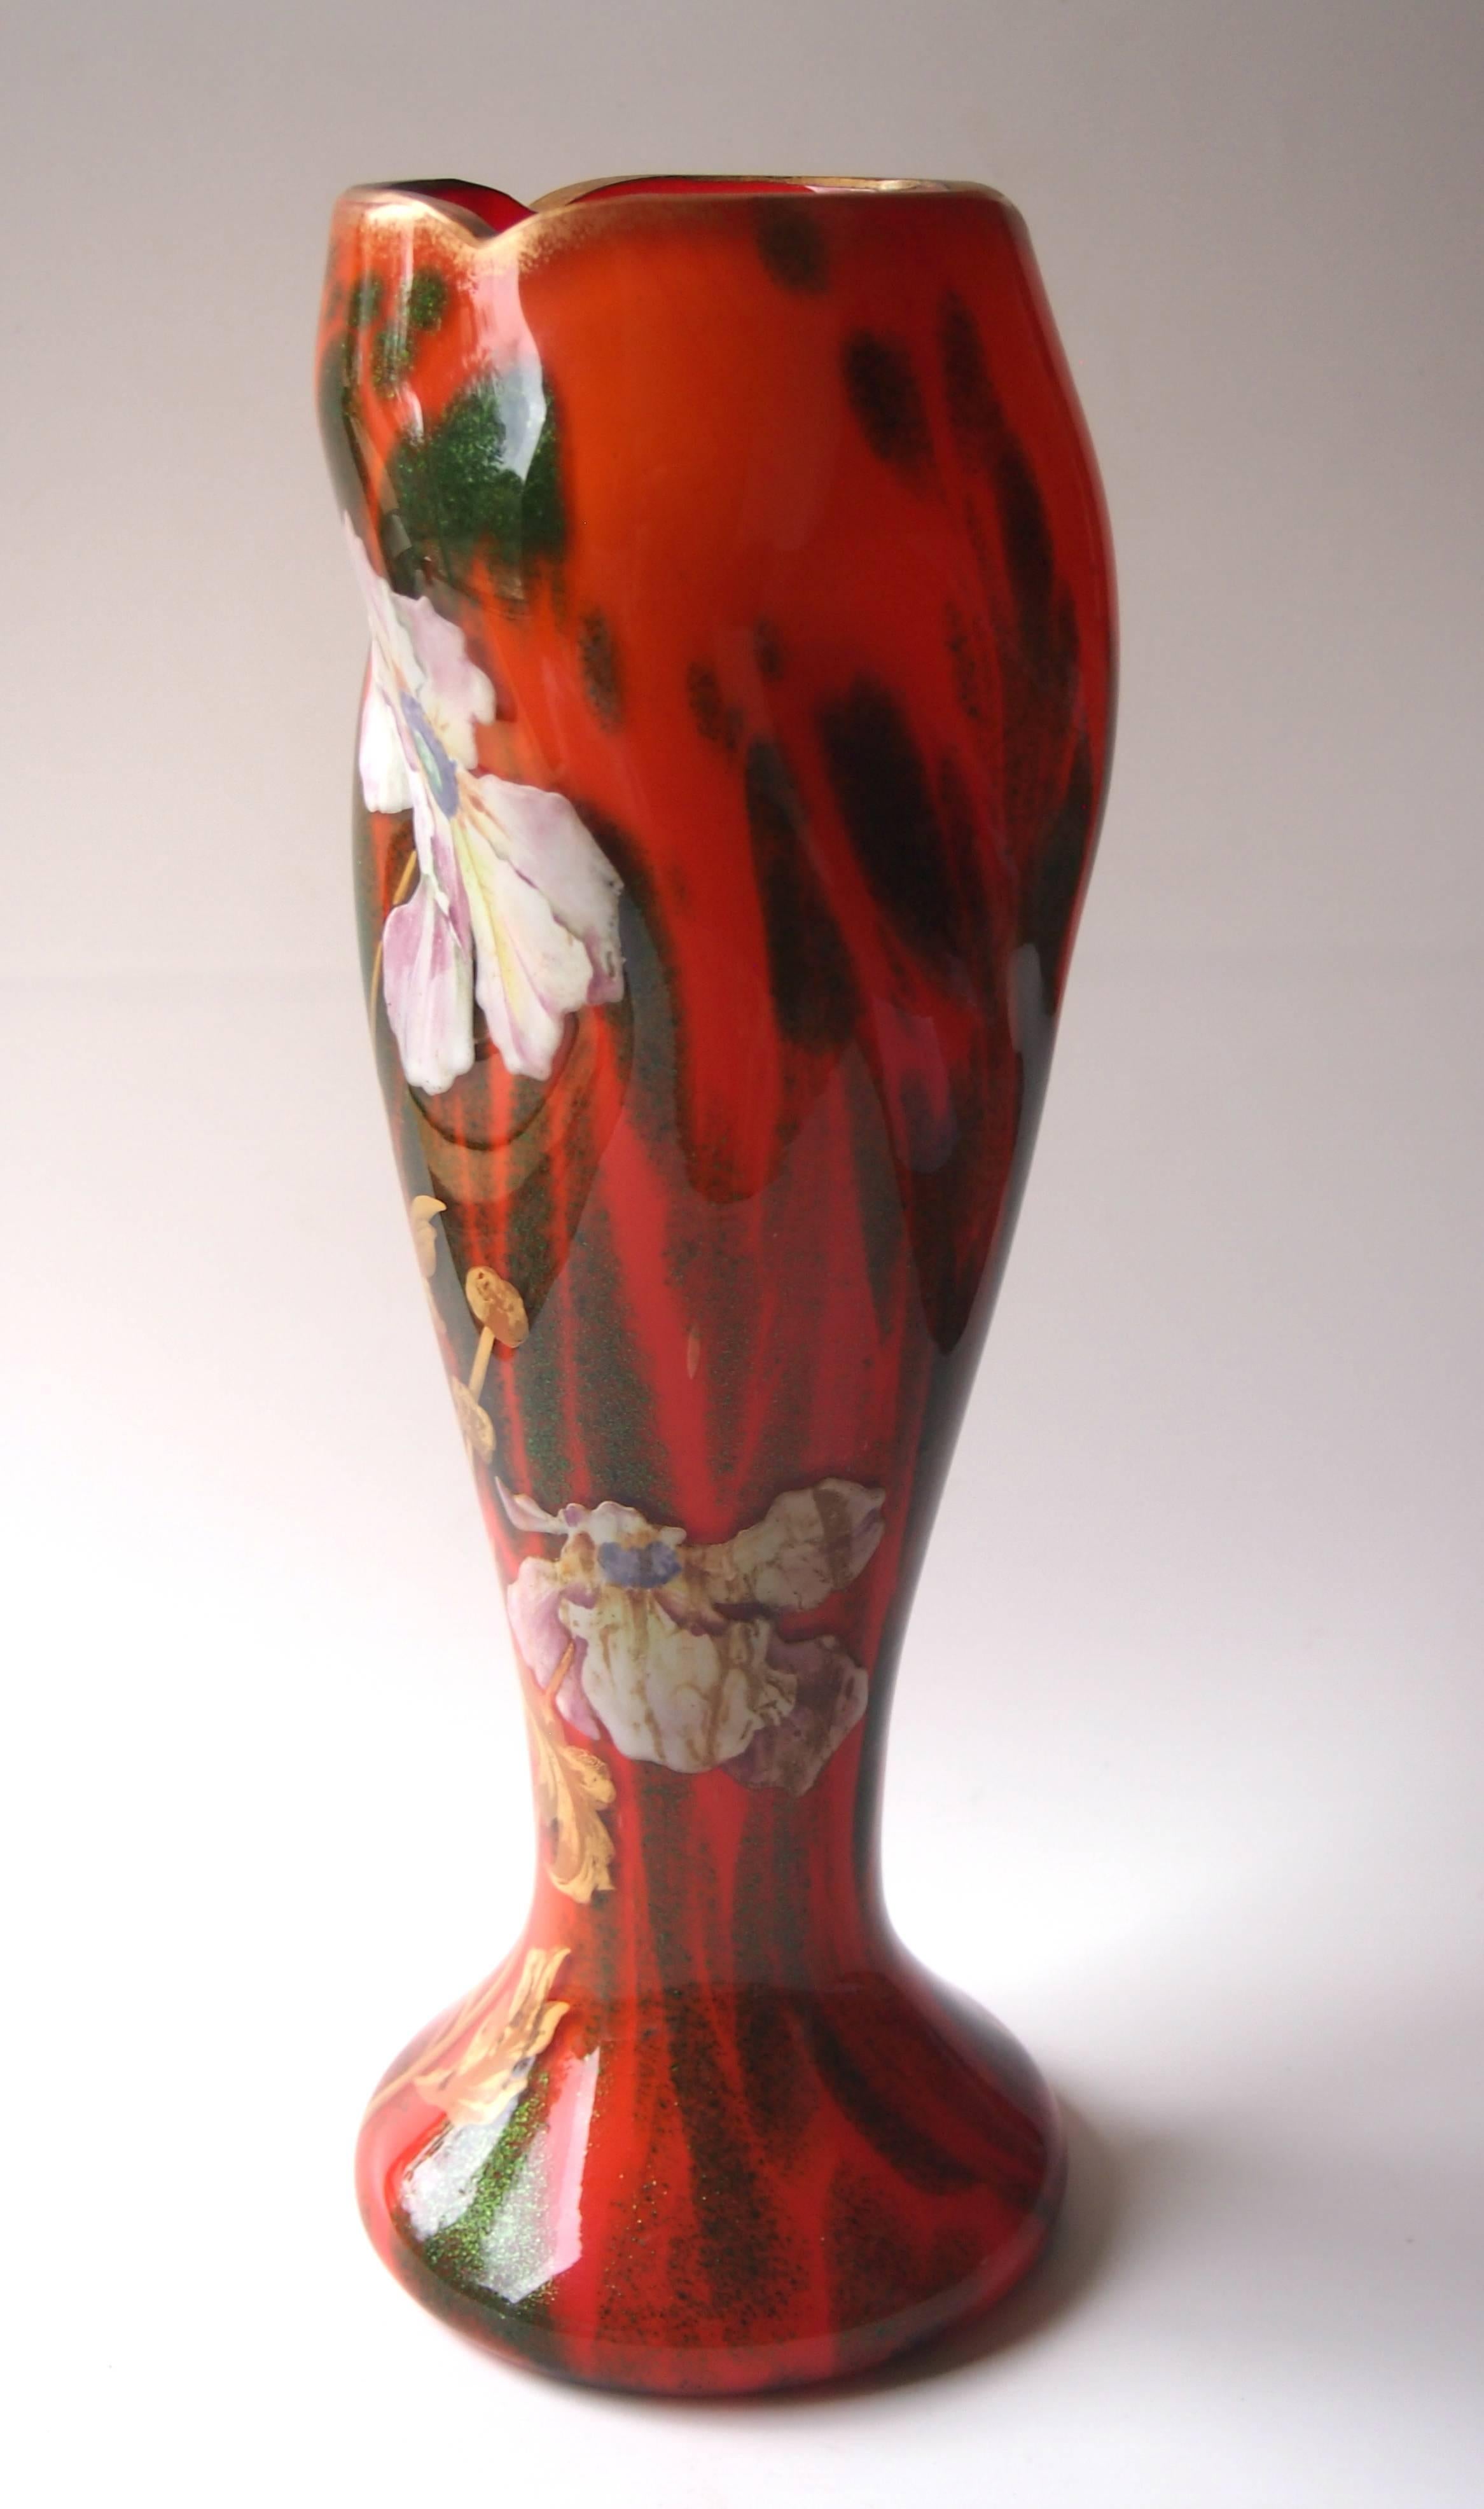 Art Nouveau vase by Harrach in a rare and unusual colourway - opaque orange cased with green aventurine - Harrach were the only company to be known to use this colour combination. The vase is gilded and enamelled with flowers.

Harrach has been